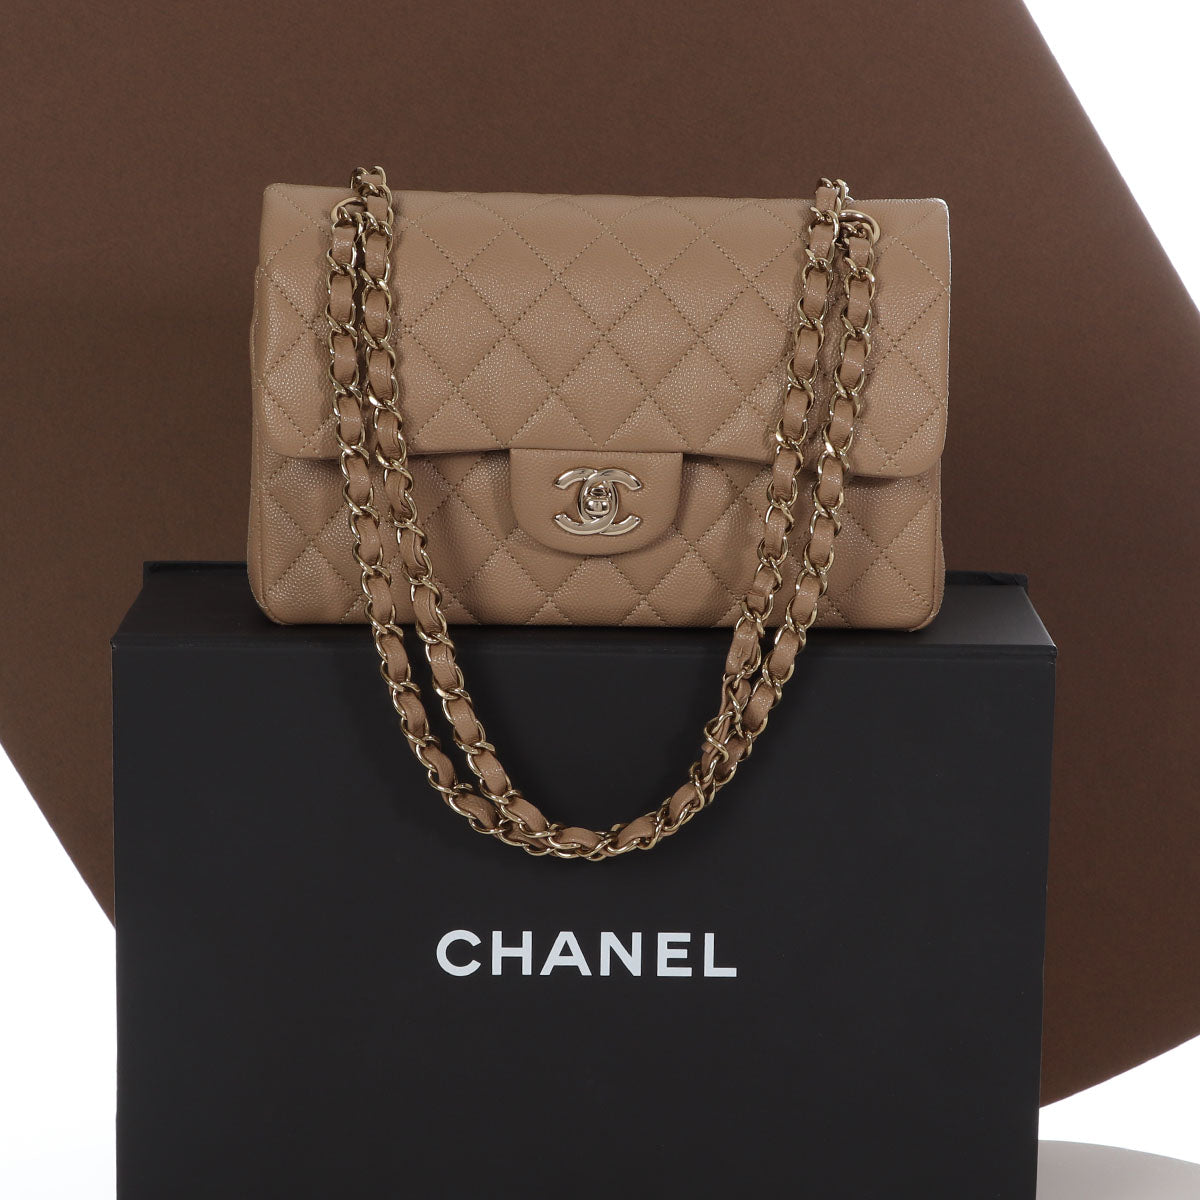 Chanel Classic Quilted Caviar Double Flap Jumbo Bag in Beige